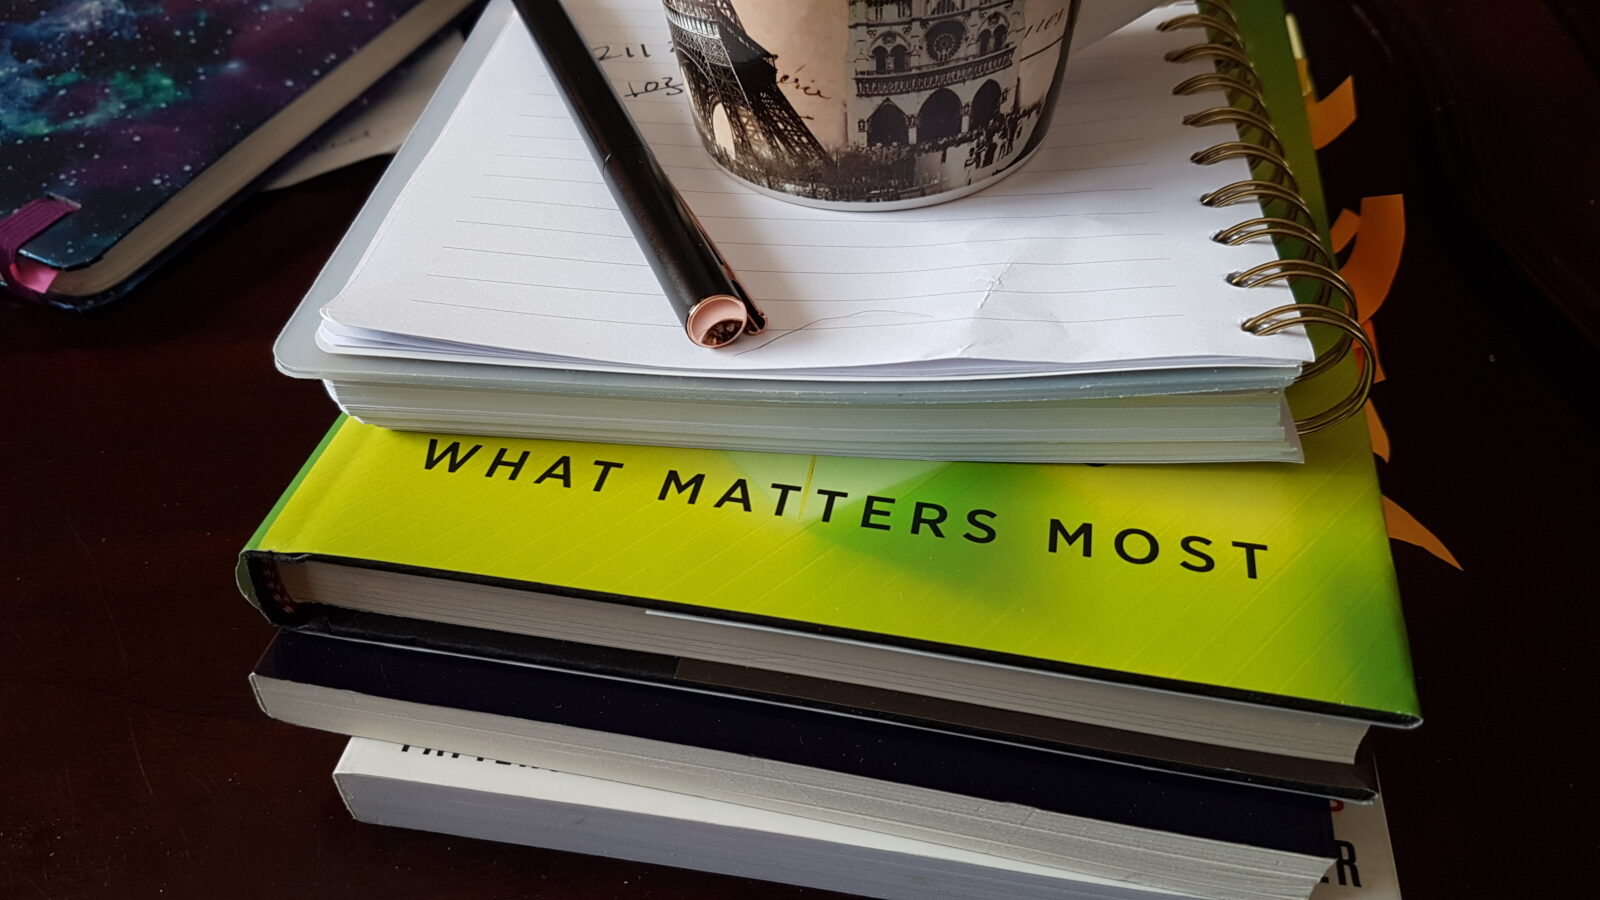 what matters